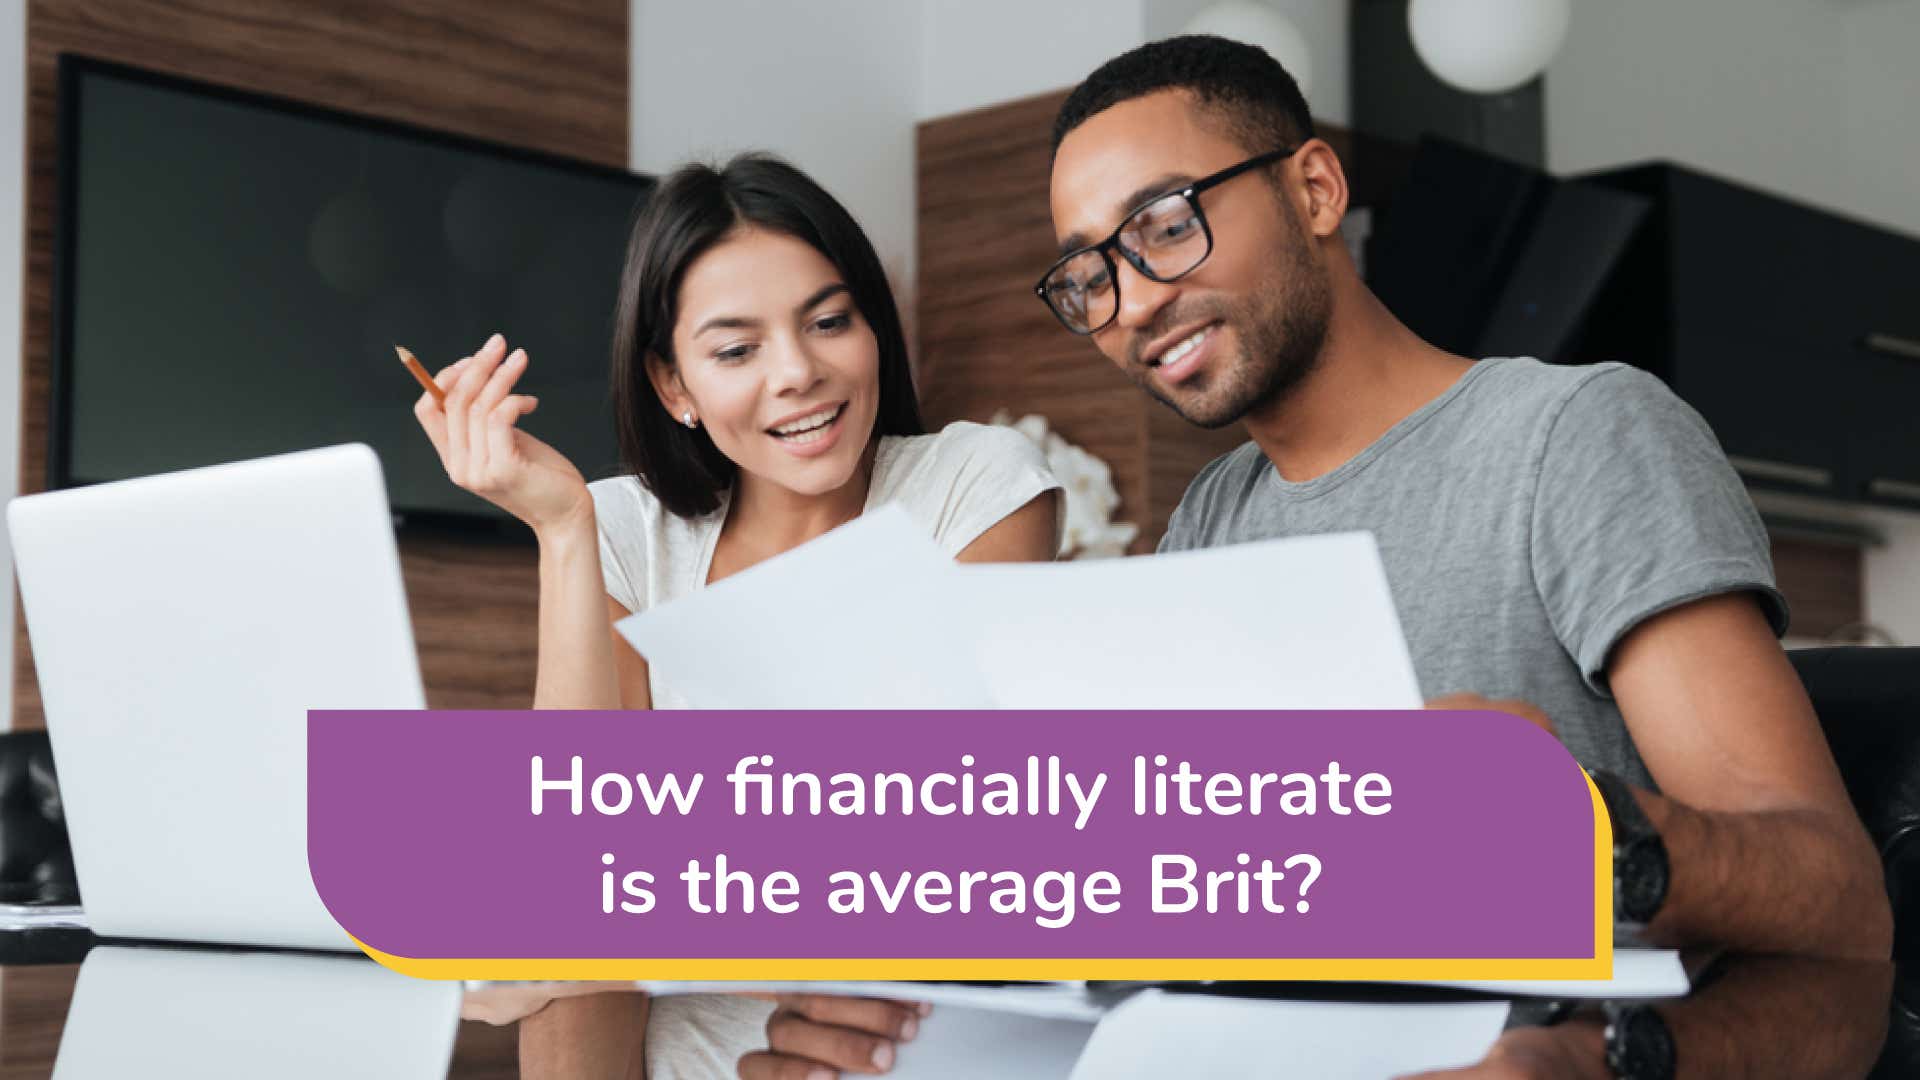 How financially literate is the average Brit?